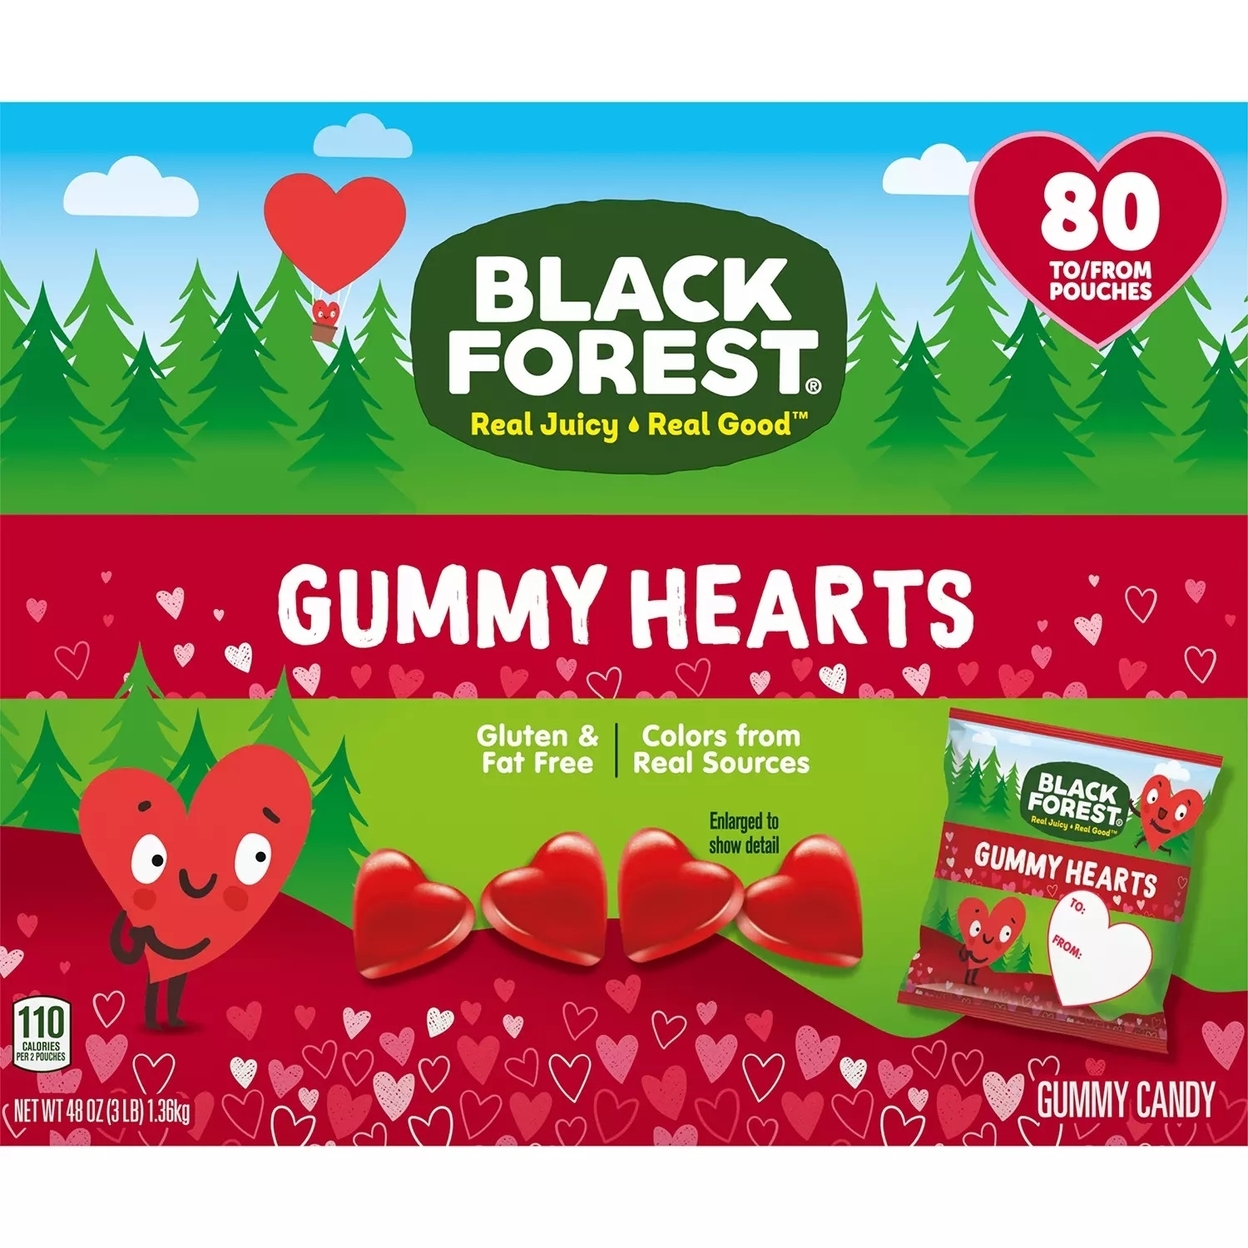 Black Forest Gummy Hearts, 56 Ounce (80 Count)